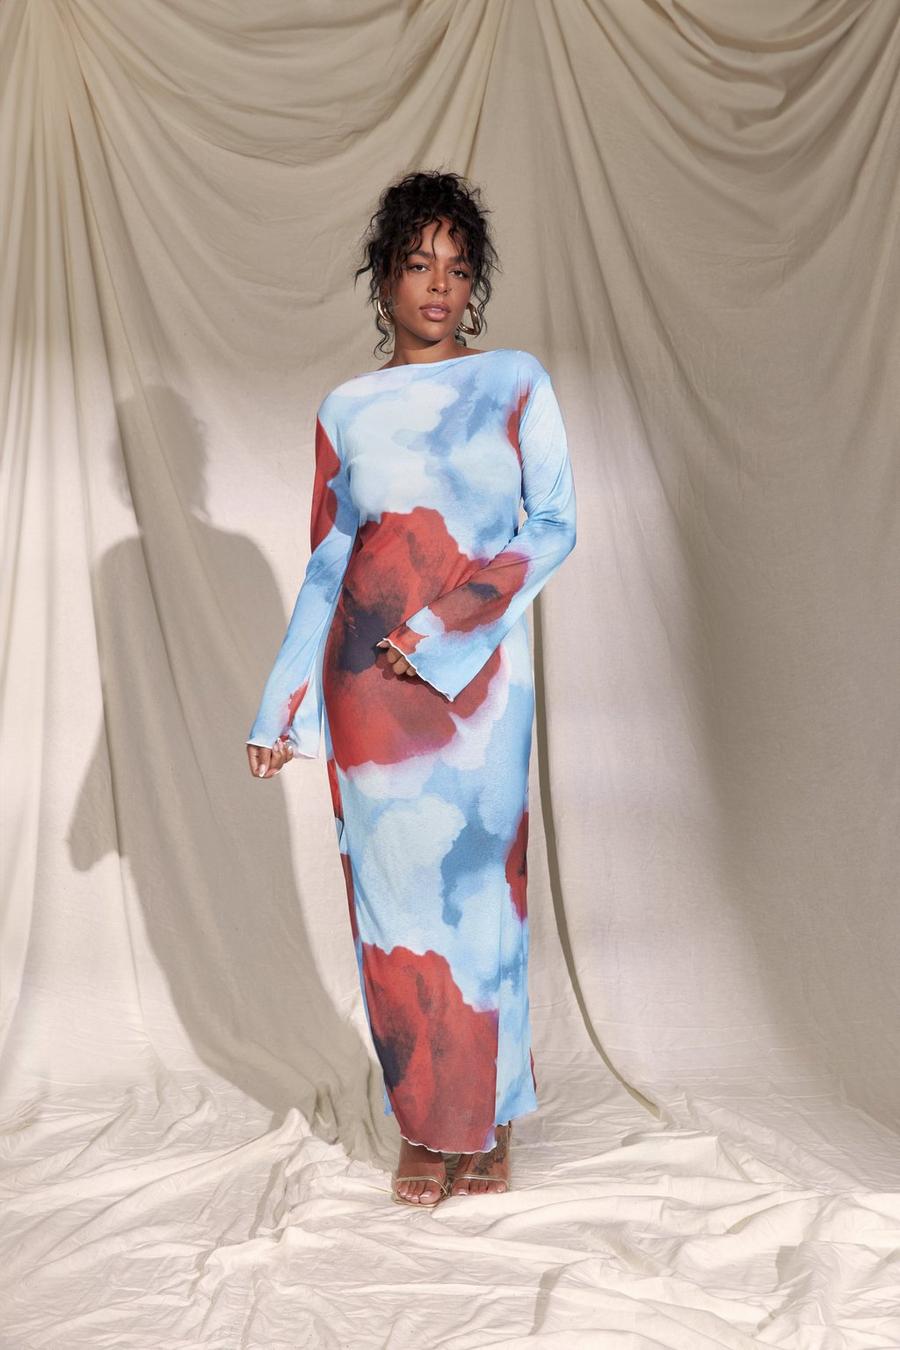 Grande taille - Robe longue fleurie, Blue image number 1